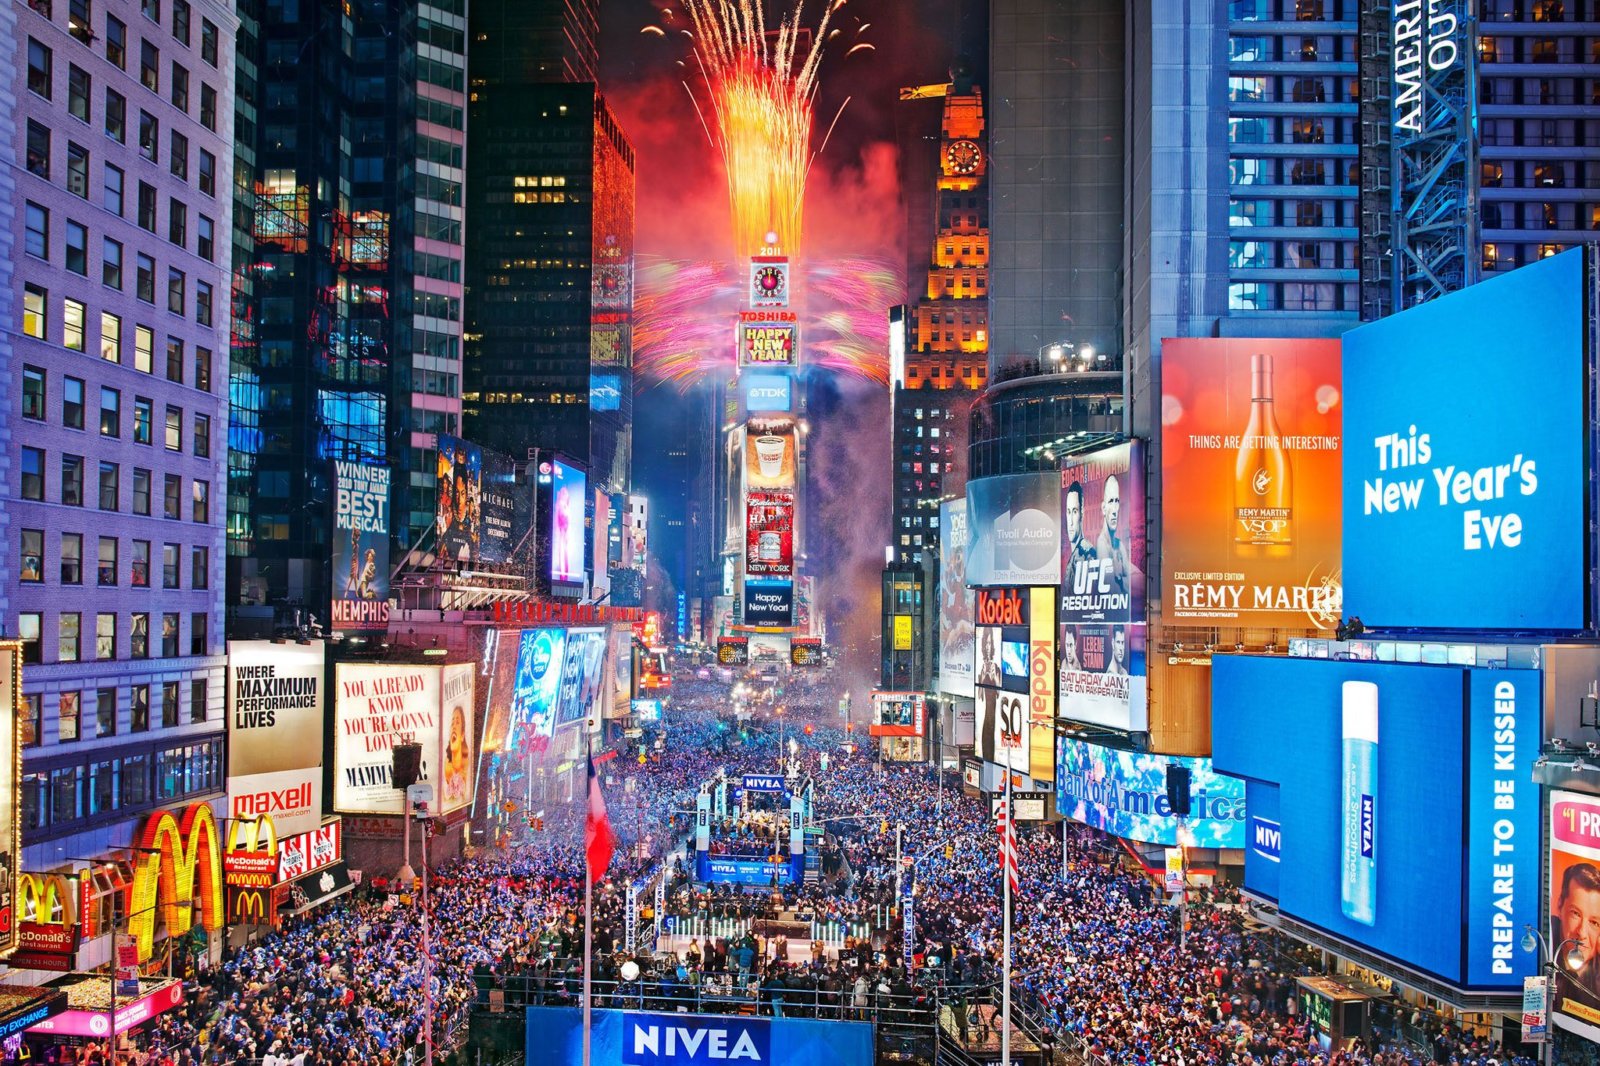 New Year’s Eve in numbers Fun facts about the Times Square ball drop